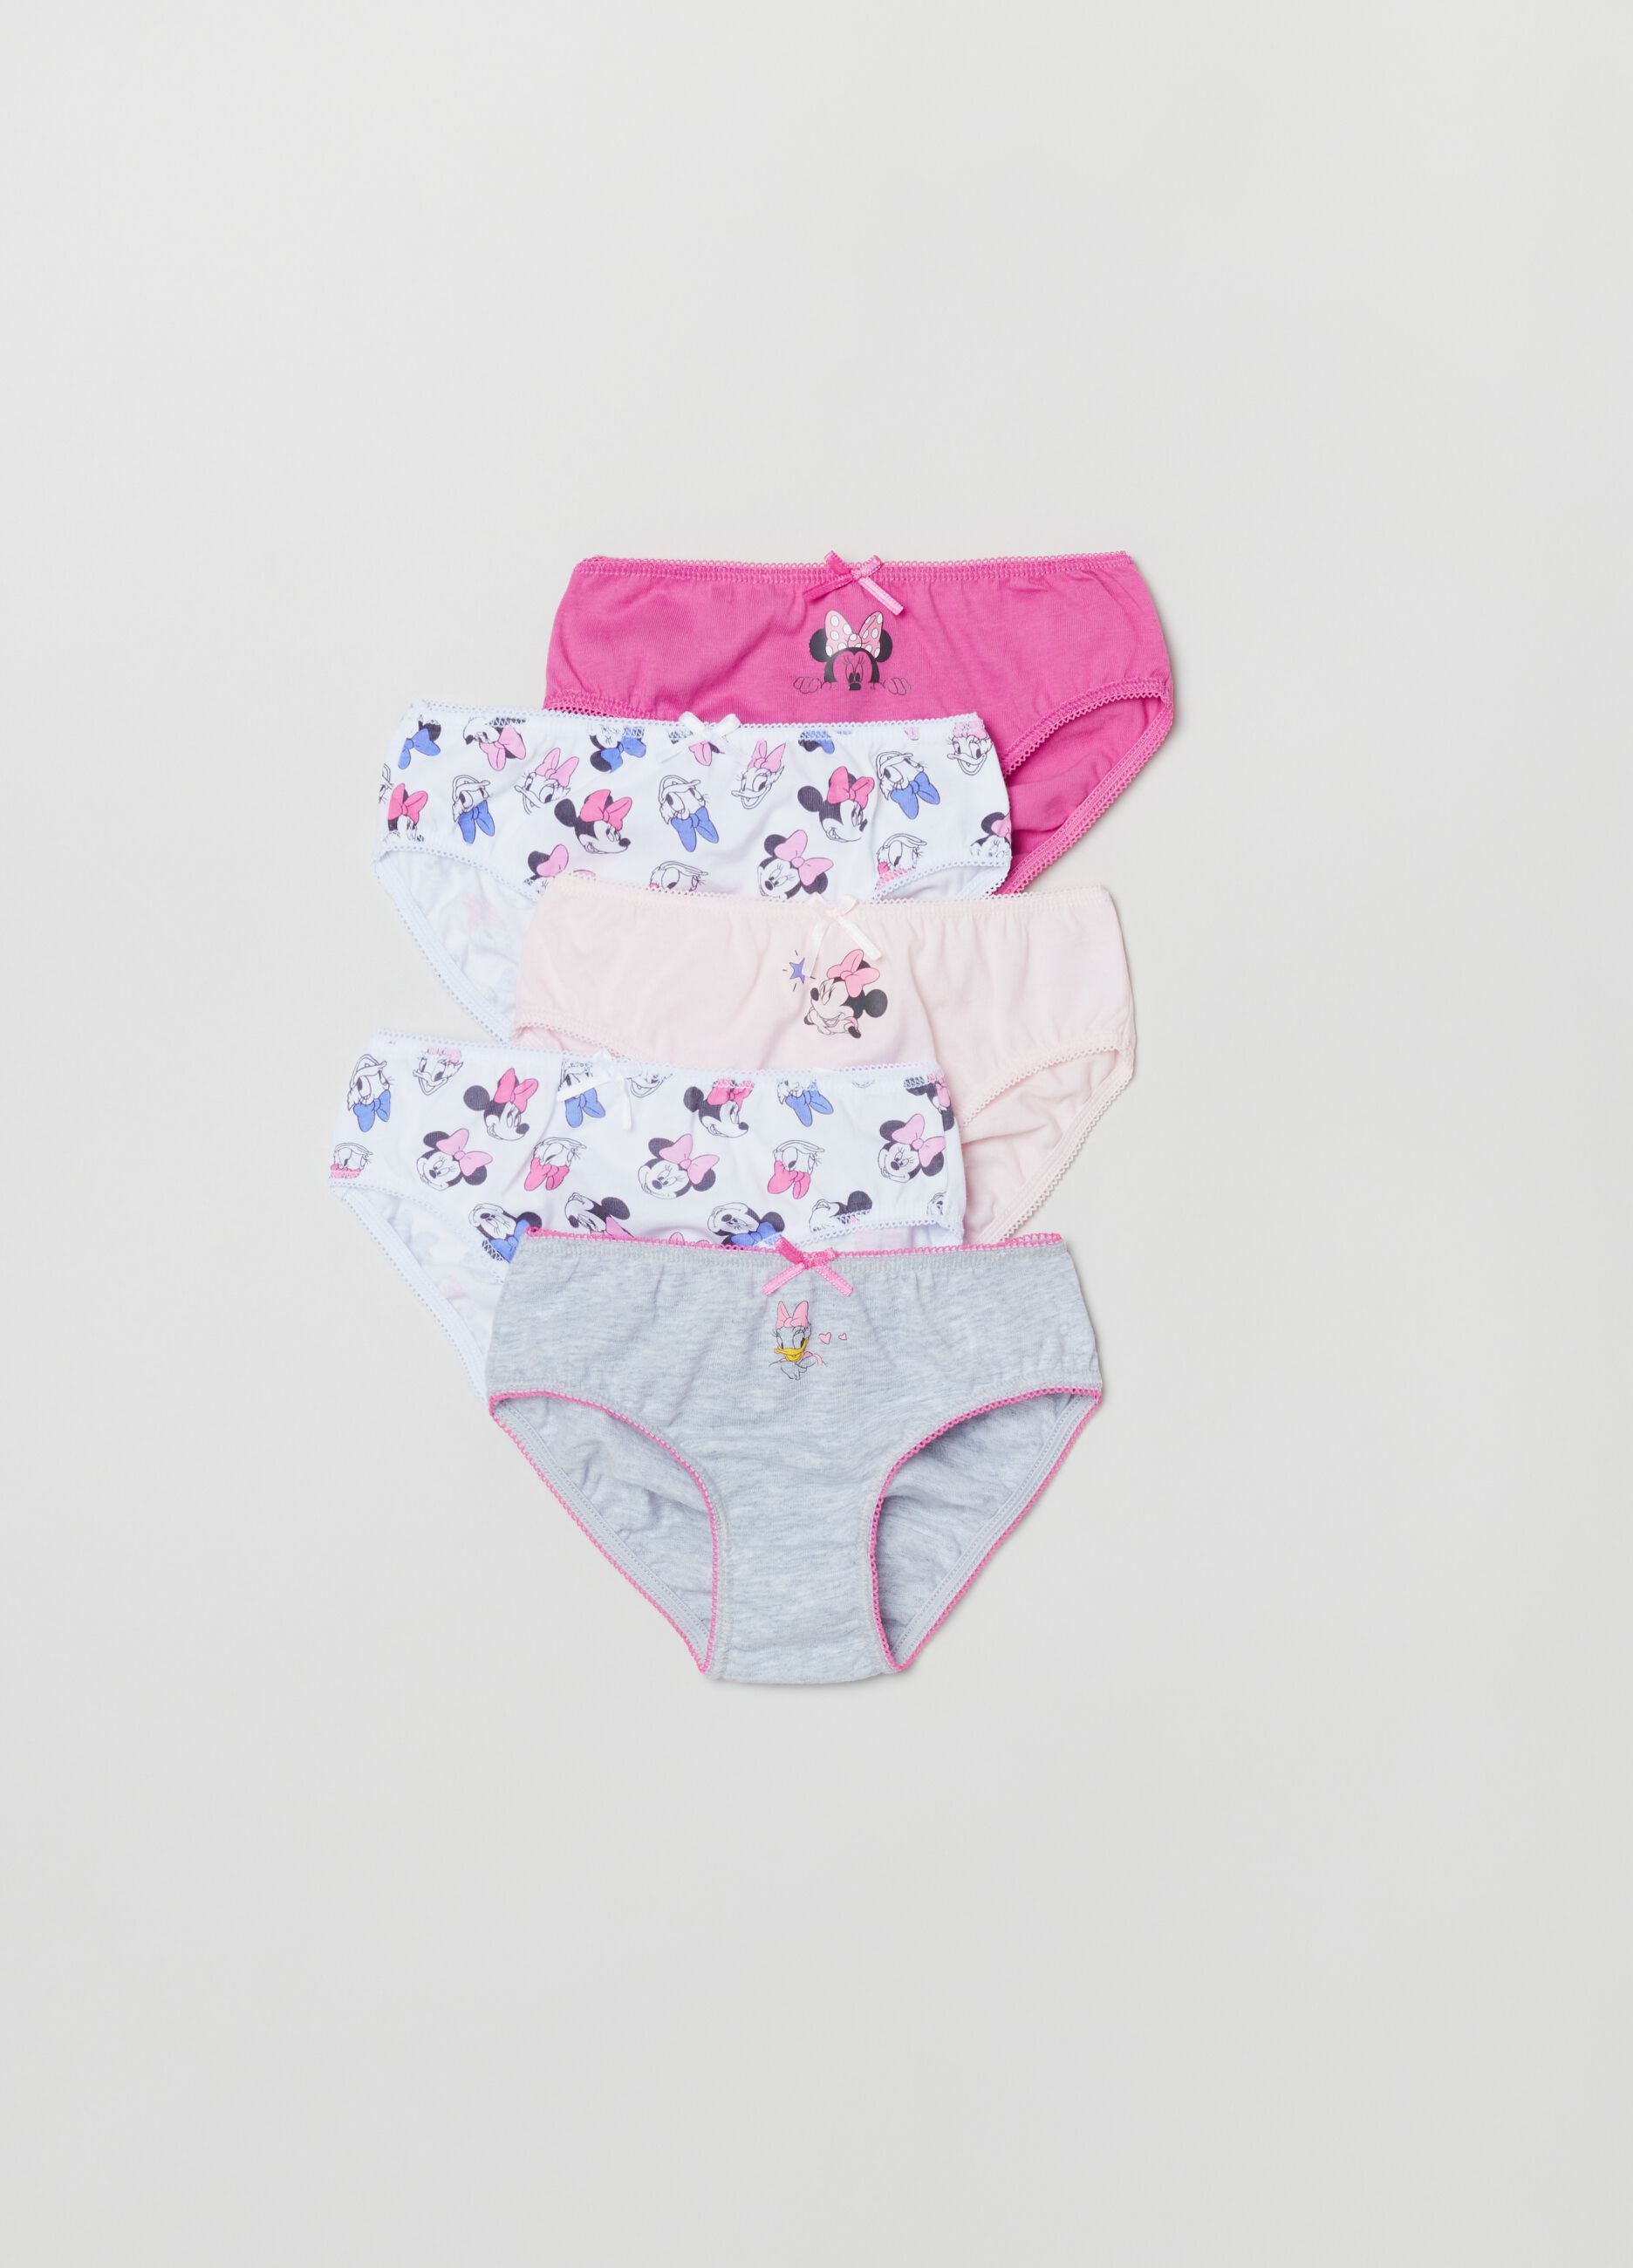 FAGOTTINO Baby Girl's Grey/Pink Five-pack briefs with Minnie Mouse and  Daisy Duck print